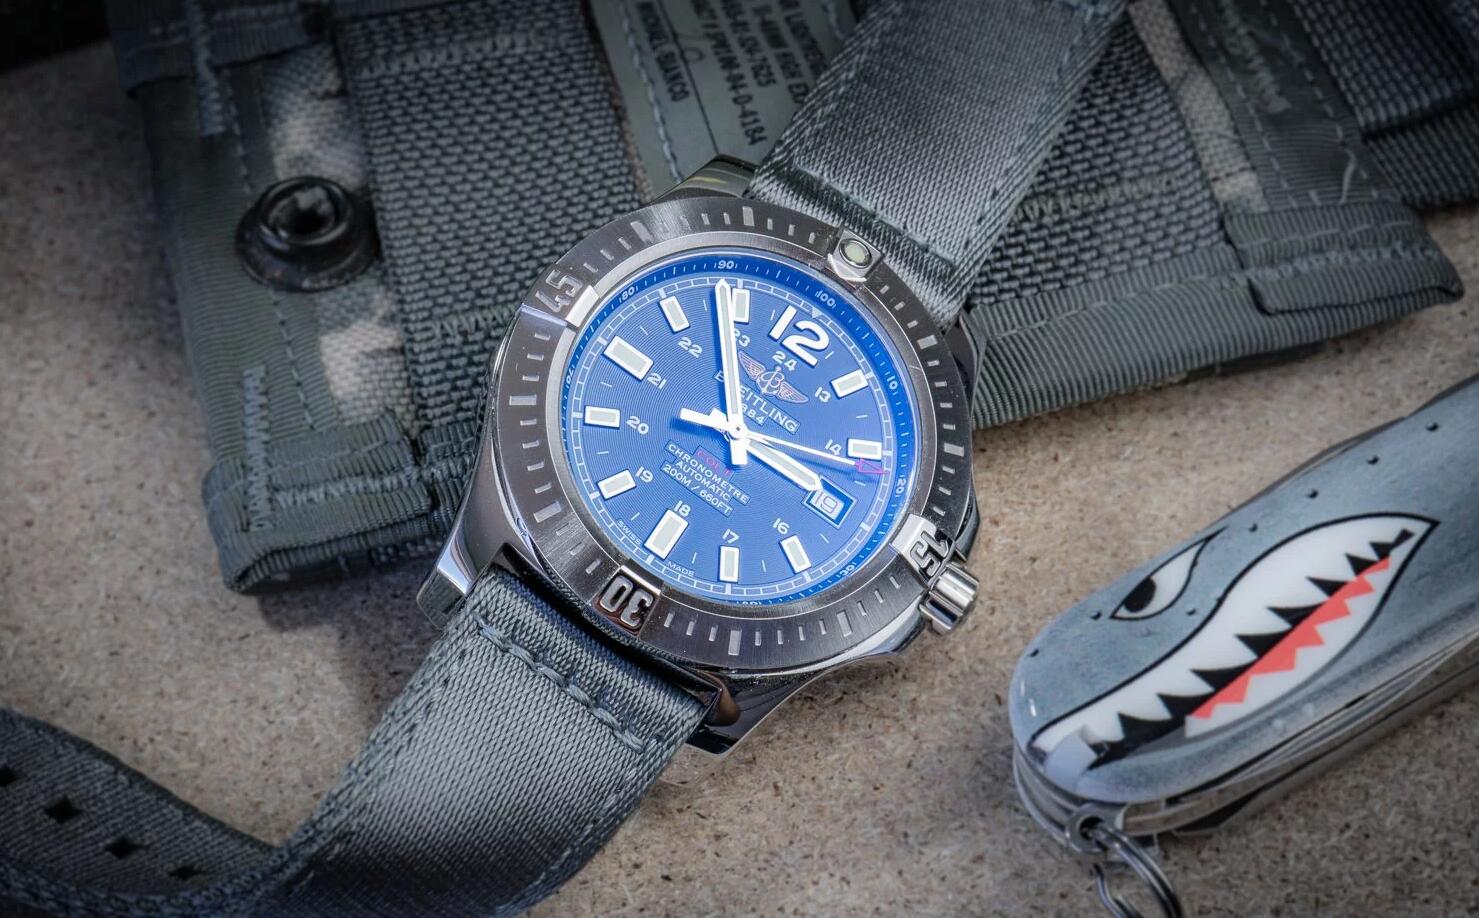 Replica Breitling Colt: Test of the striking military watch with diving elements